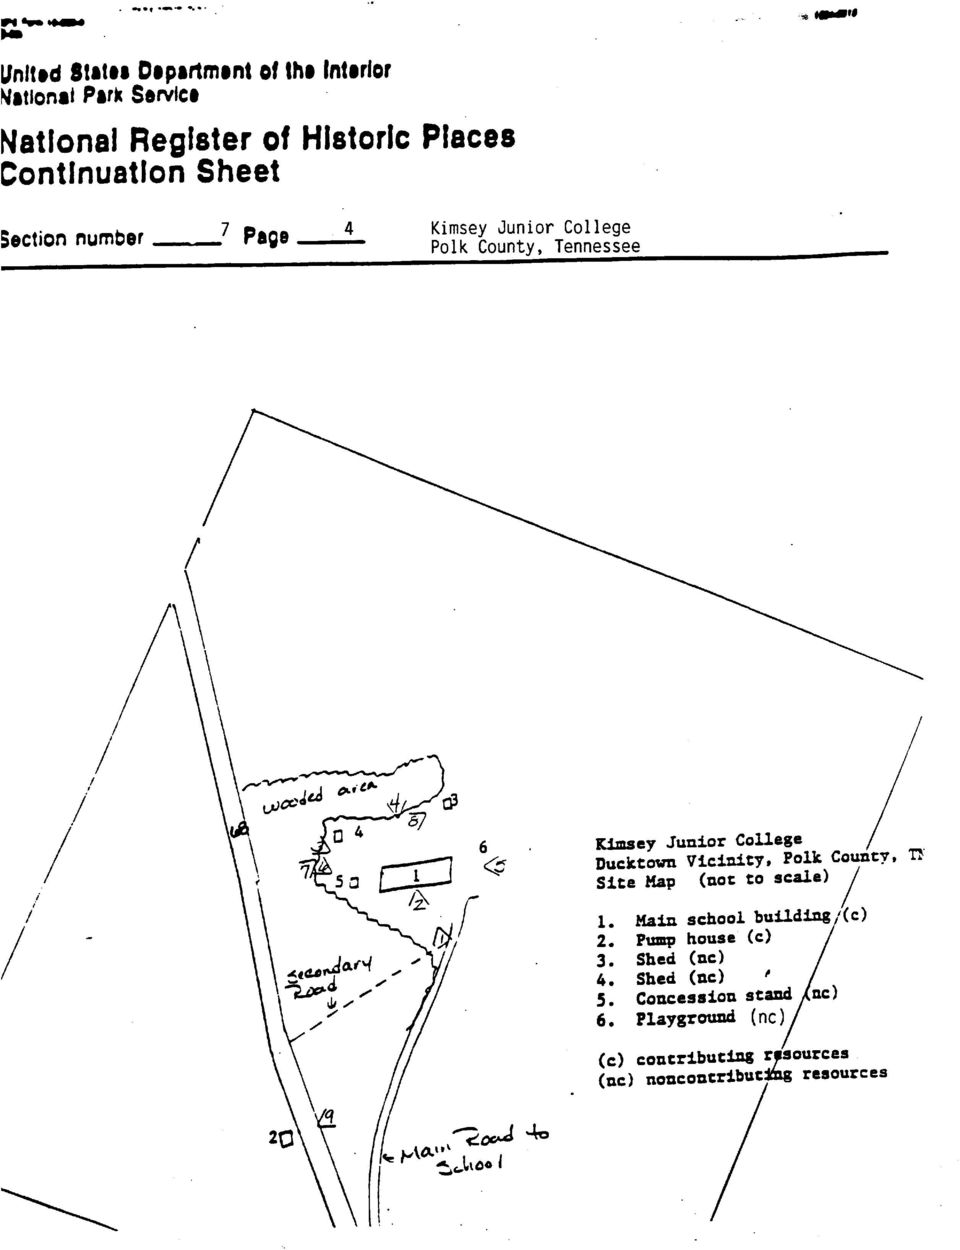 Polk County, TJ Site Map (not to scale) 1. Main school building/(c) 2.